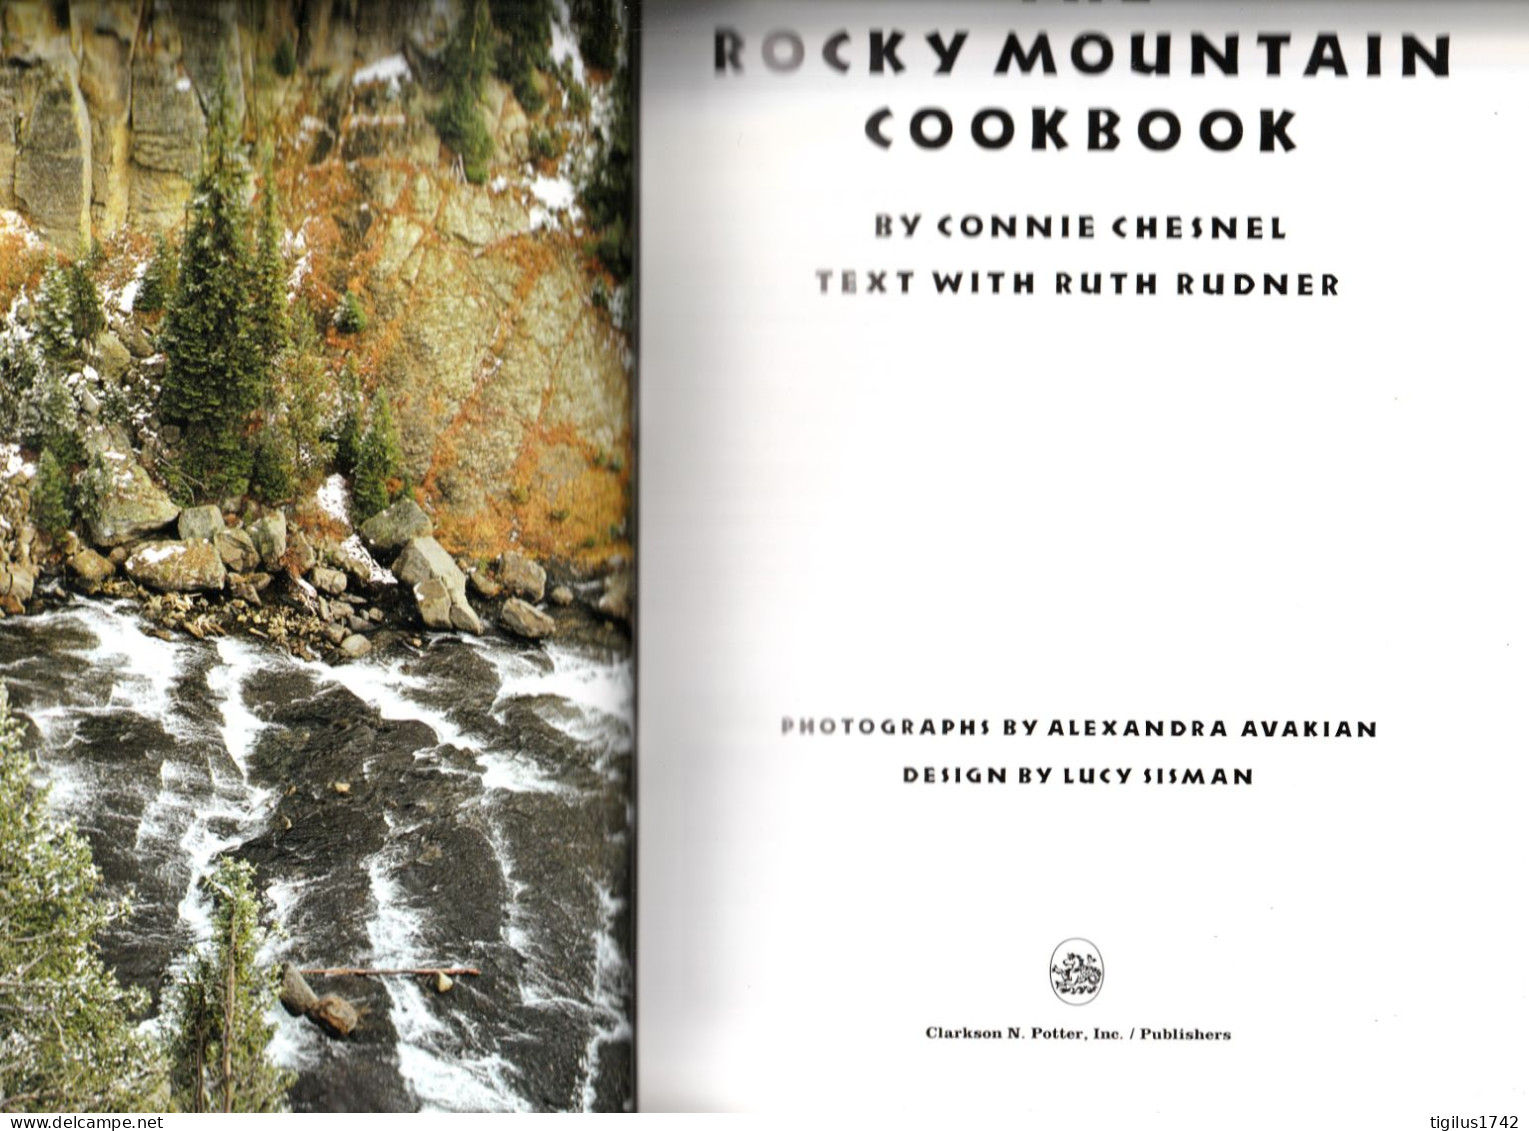 Chesnel Connie And Rudner Ruth. The Rocky Mountain Cookbook. Potter éd., 1988 - American (US)